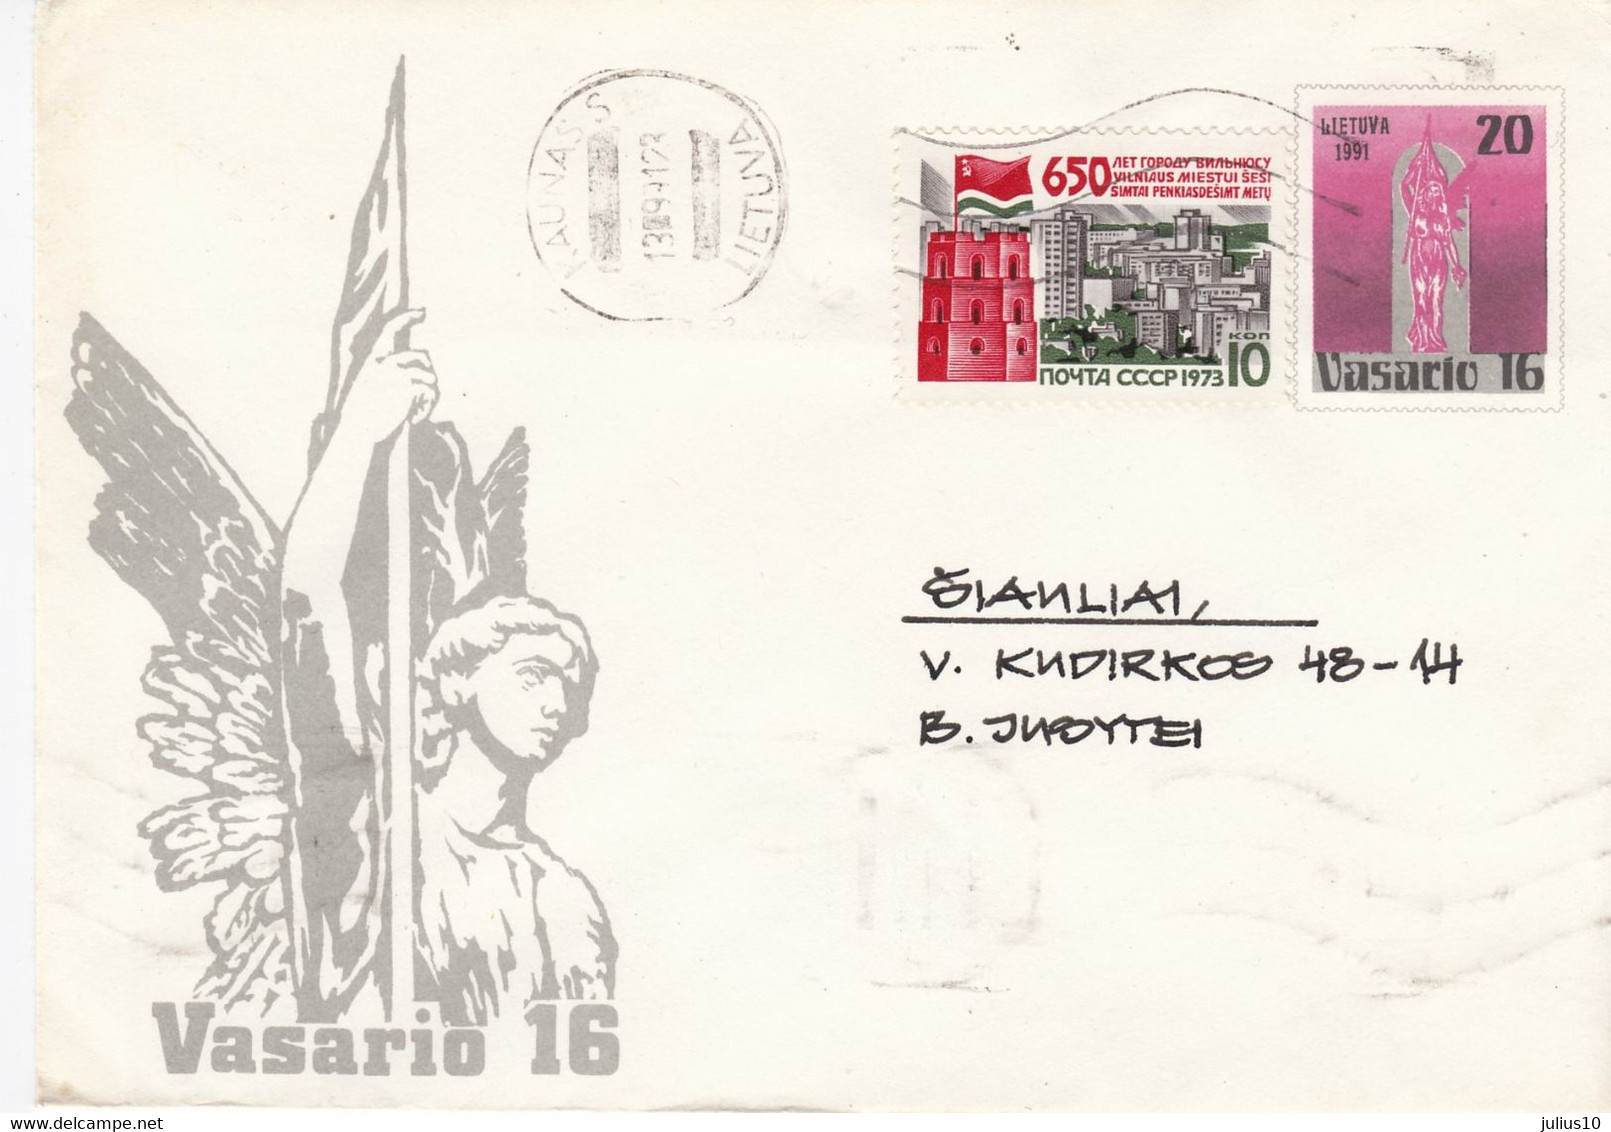 LITHUANIA READ Local Post Cover From Kaunas To Siauliai Mixed USSR Lithuania Stamps 1991 #25682 - Litauen